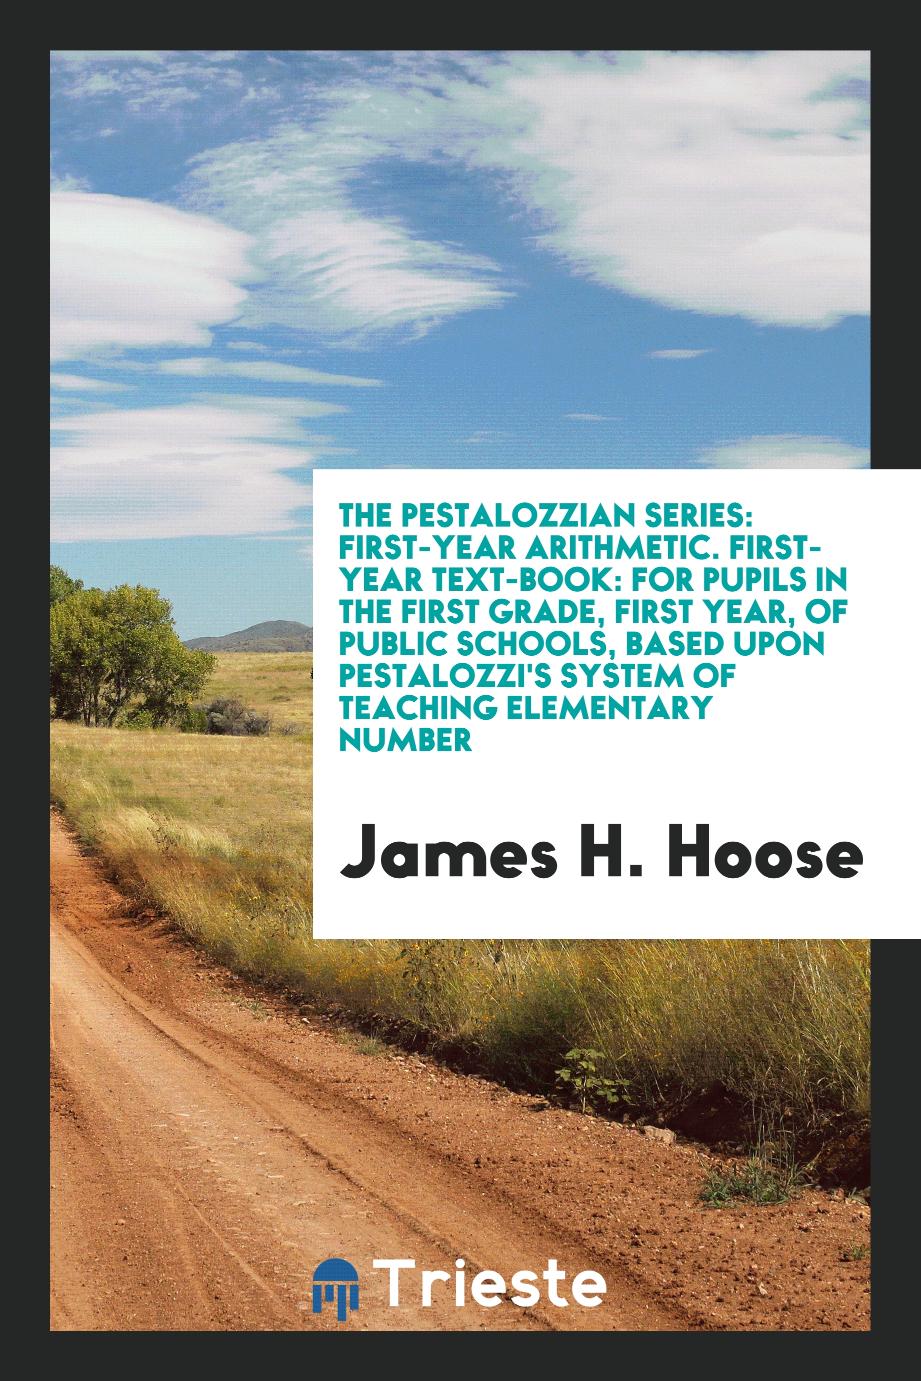 The Pestalozzian Series: First-Year Arithmetic. First-Year Text-Book: For Pupils in the First Grade, First Year, of Public Schools, Based upon Pestalozzi's System of Teaching Elementary Number